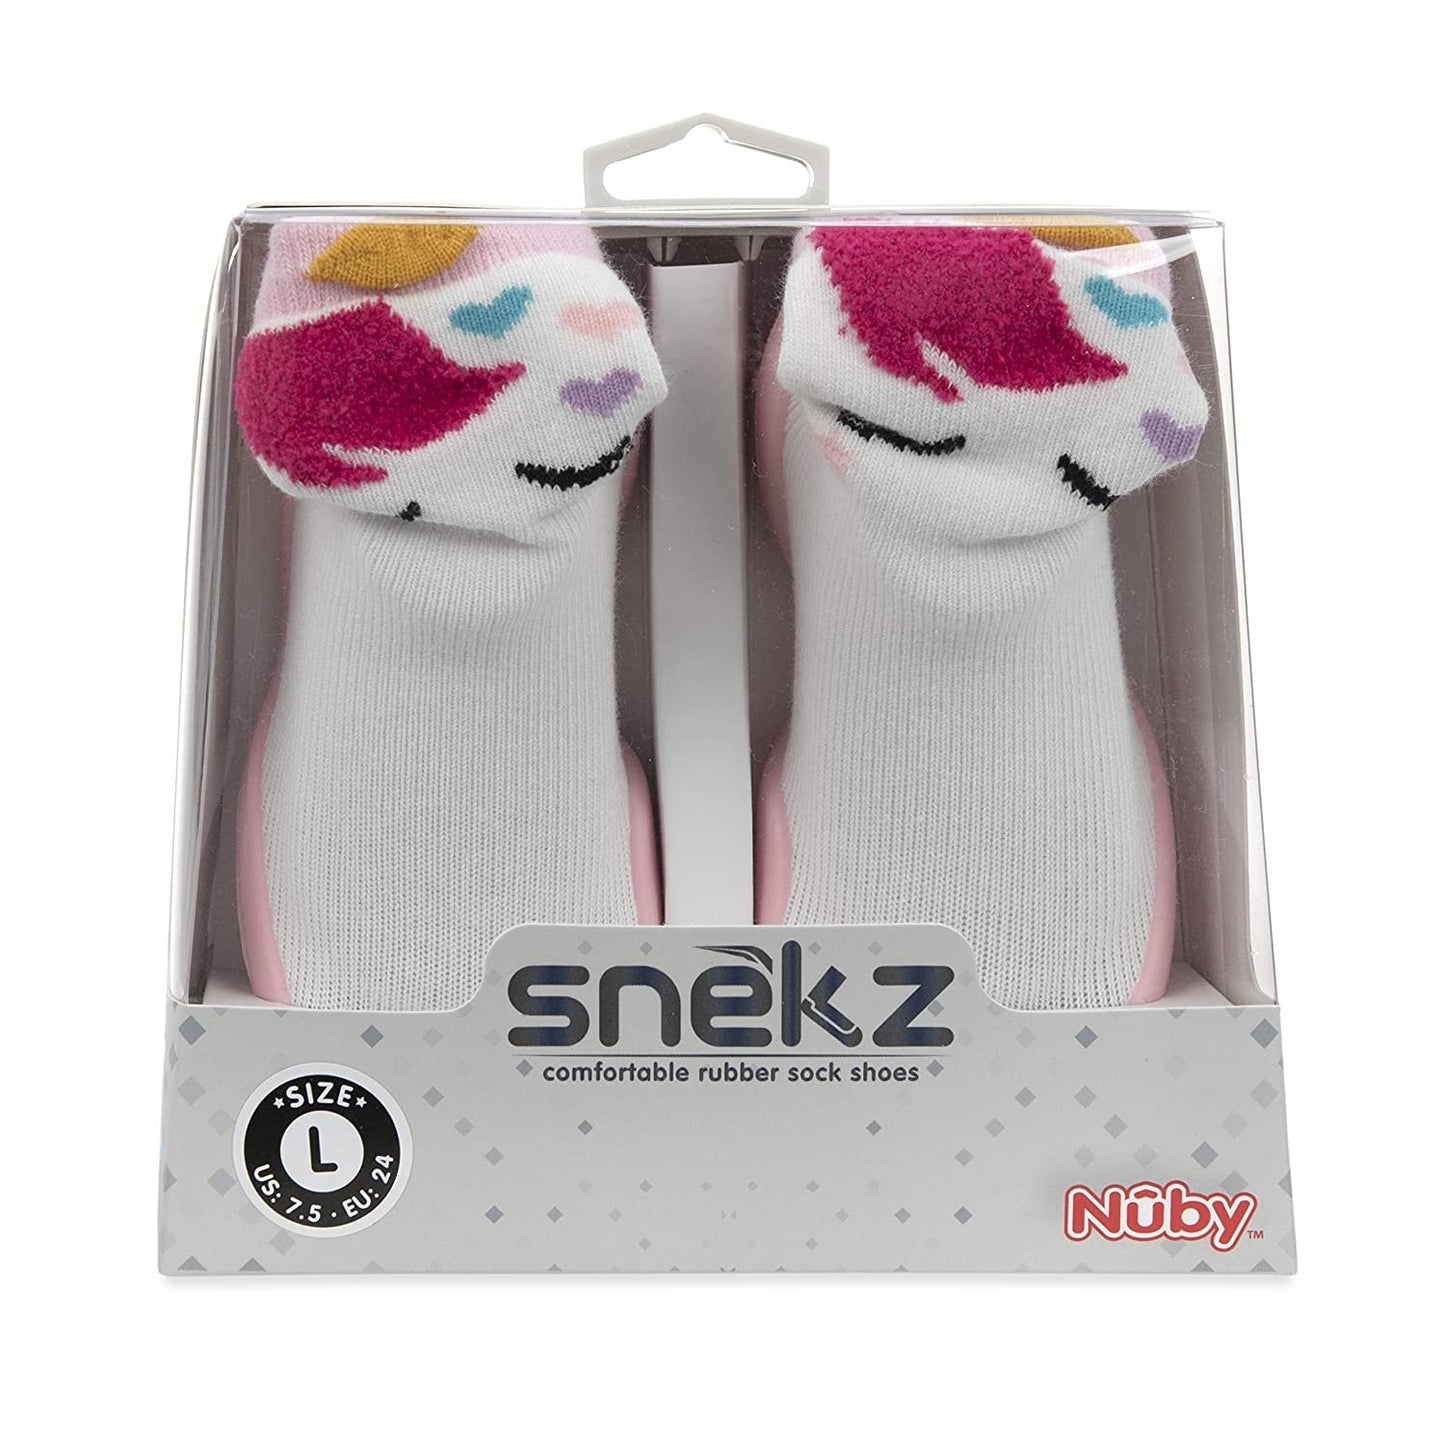 Nuby Snekz Comfortable Rubber Sole Sock Shoes for First Steps